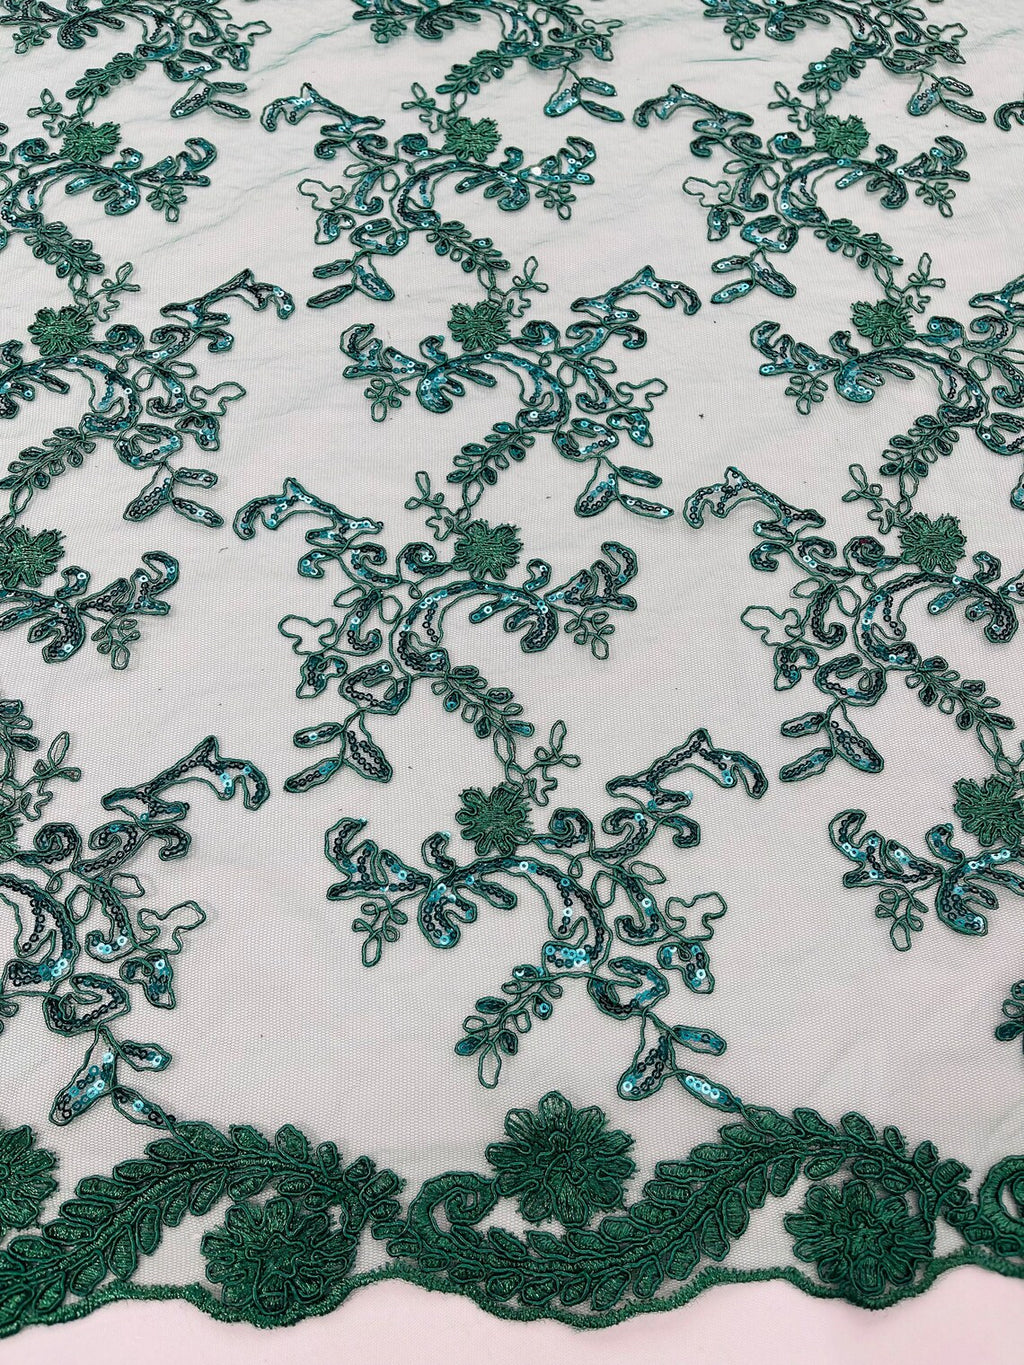 Embroidered Green Lace